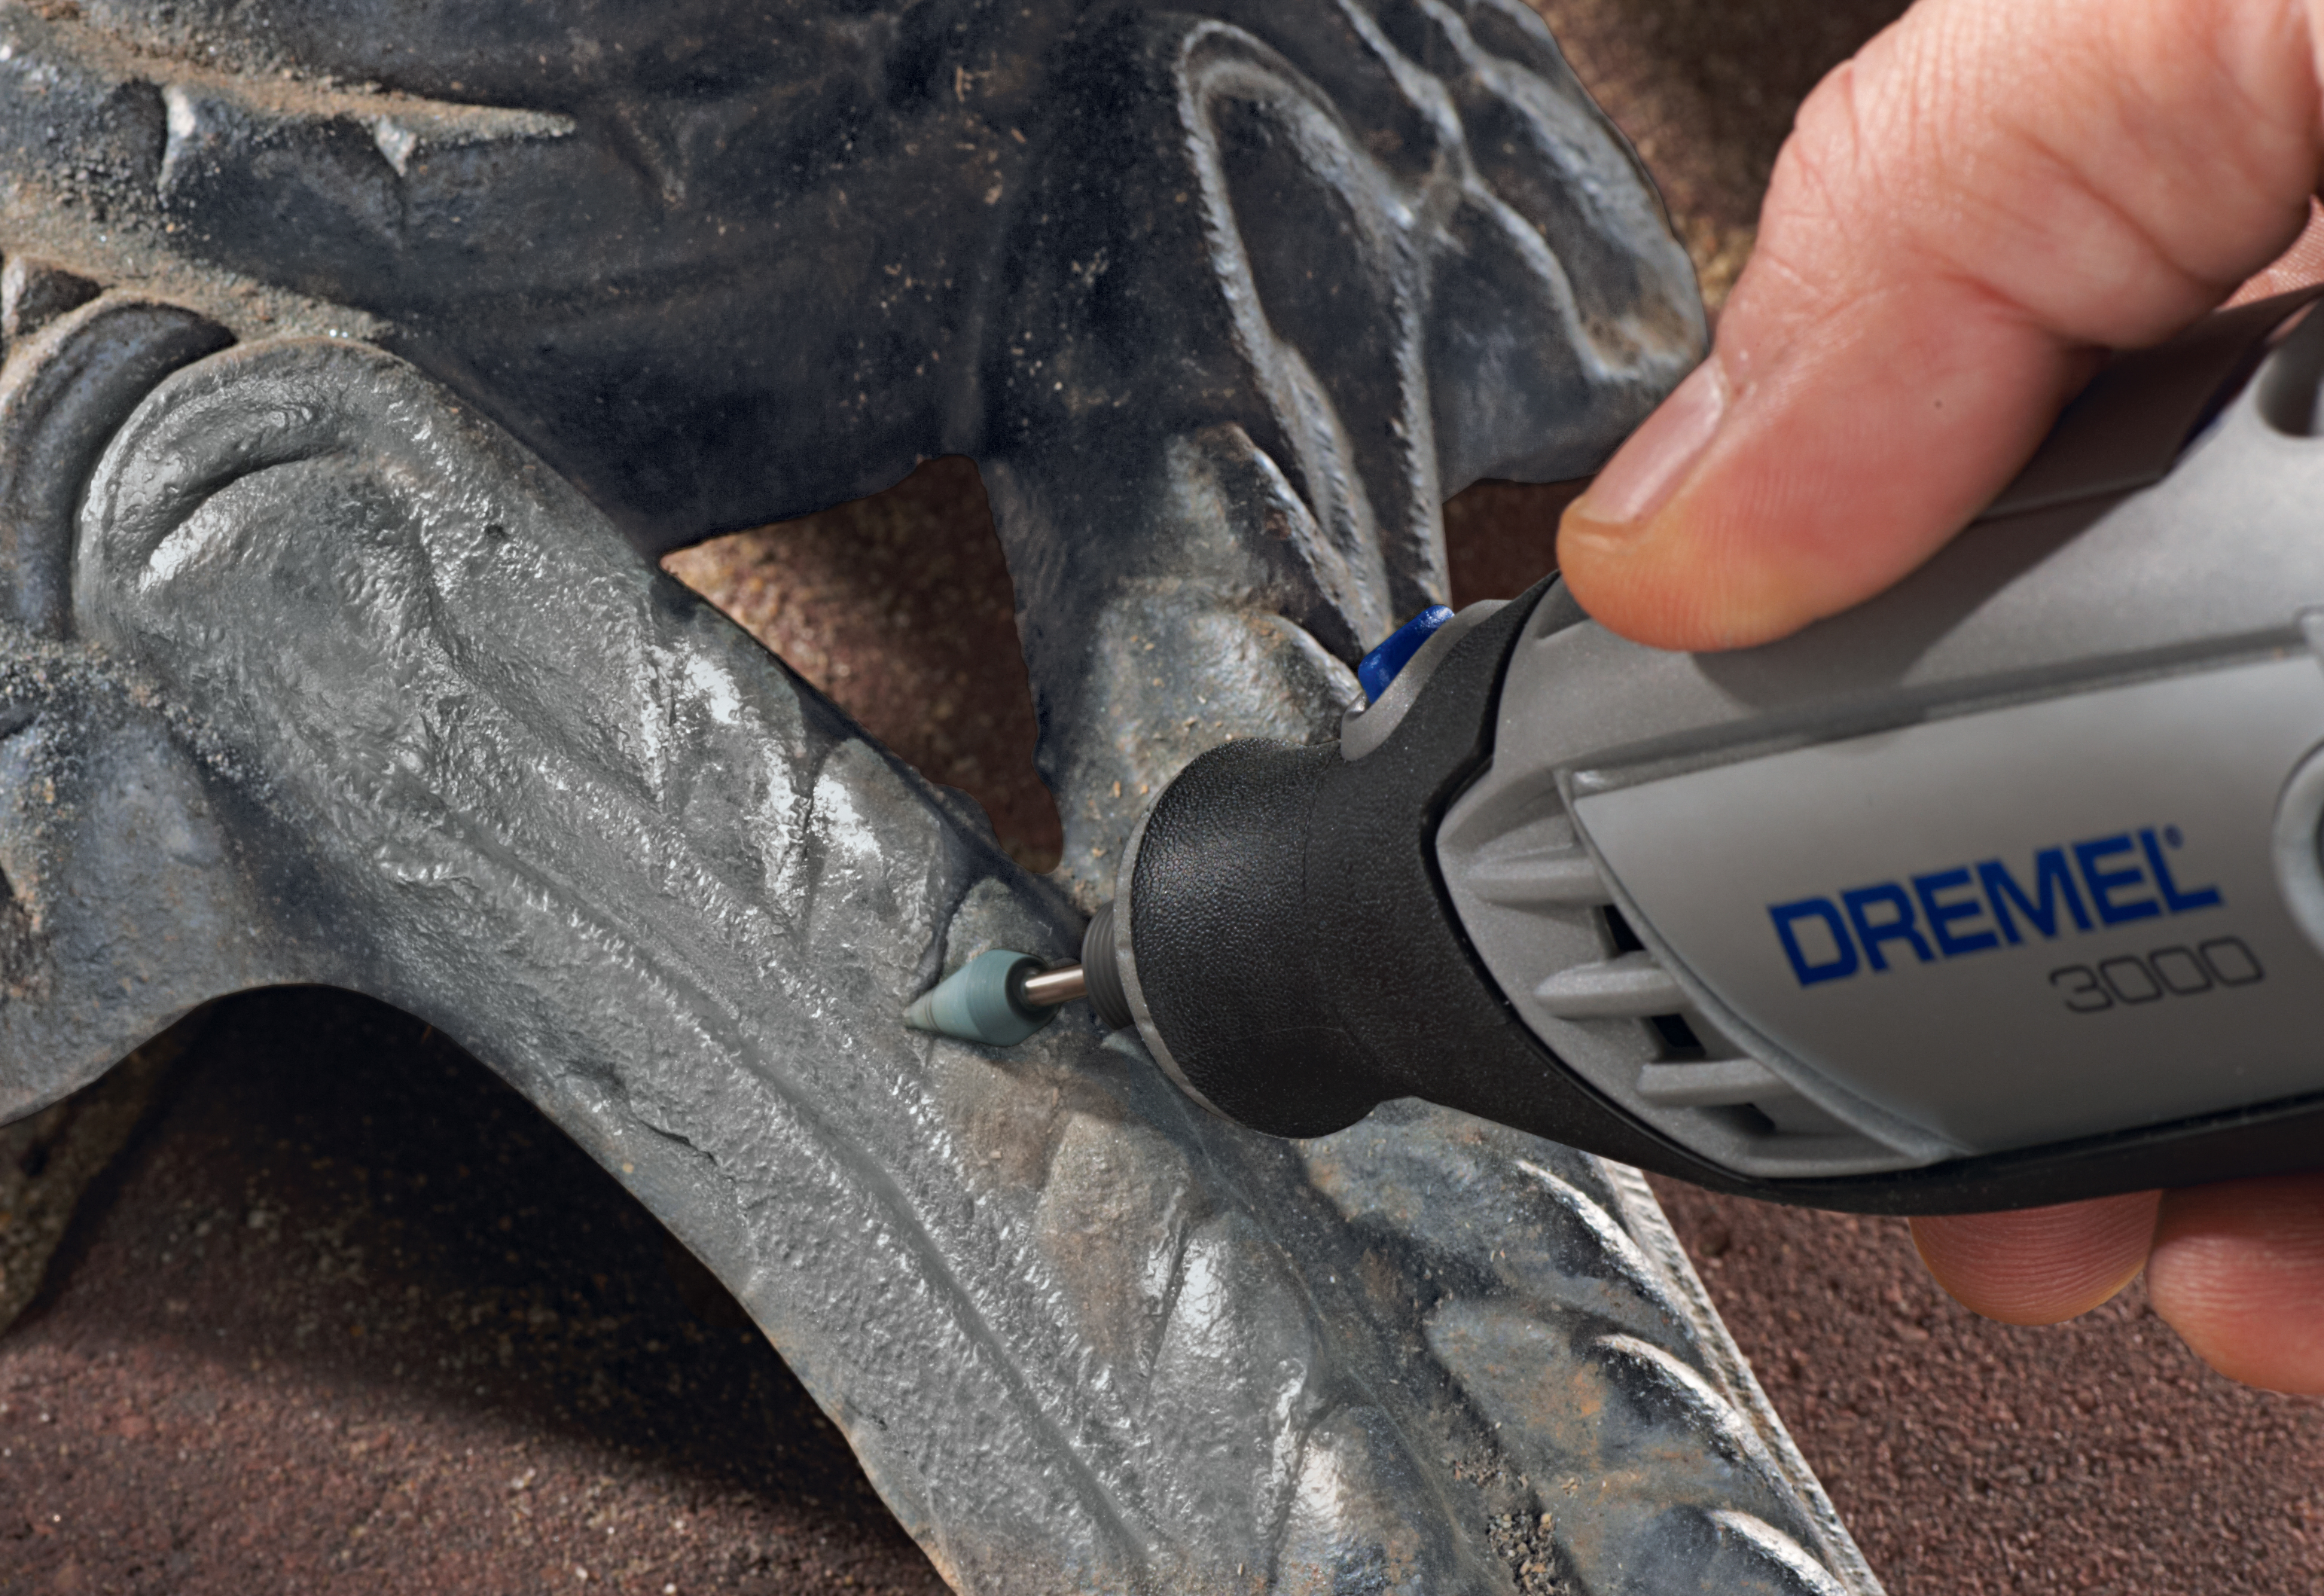 Dremel 3000-N/18 Variable Speed Rotary Tool with EZ Twist™ Nose Cap, 18 Accessories - image 3 of 27